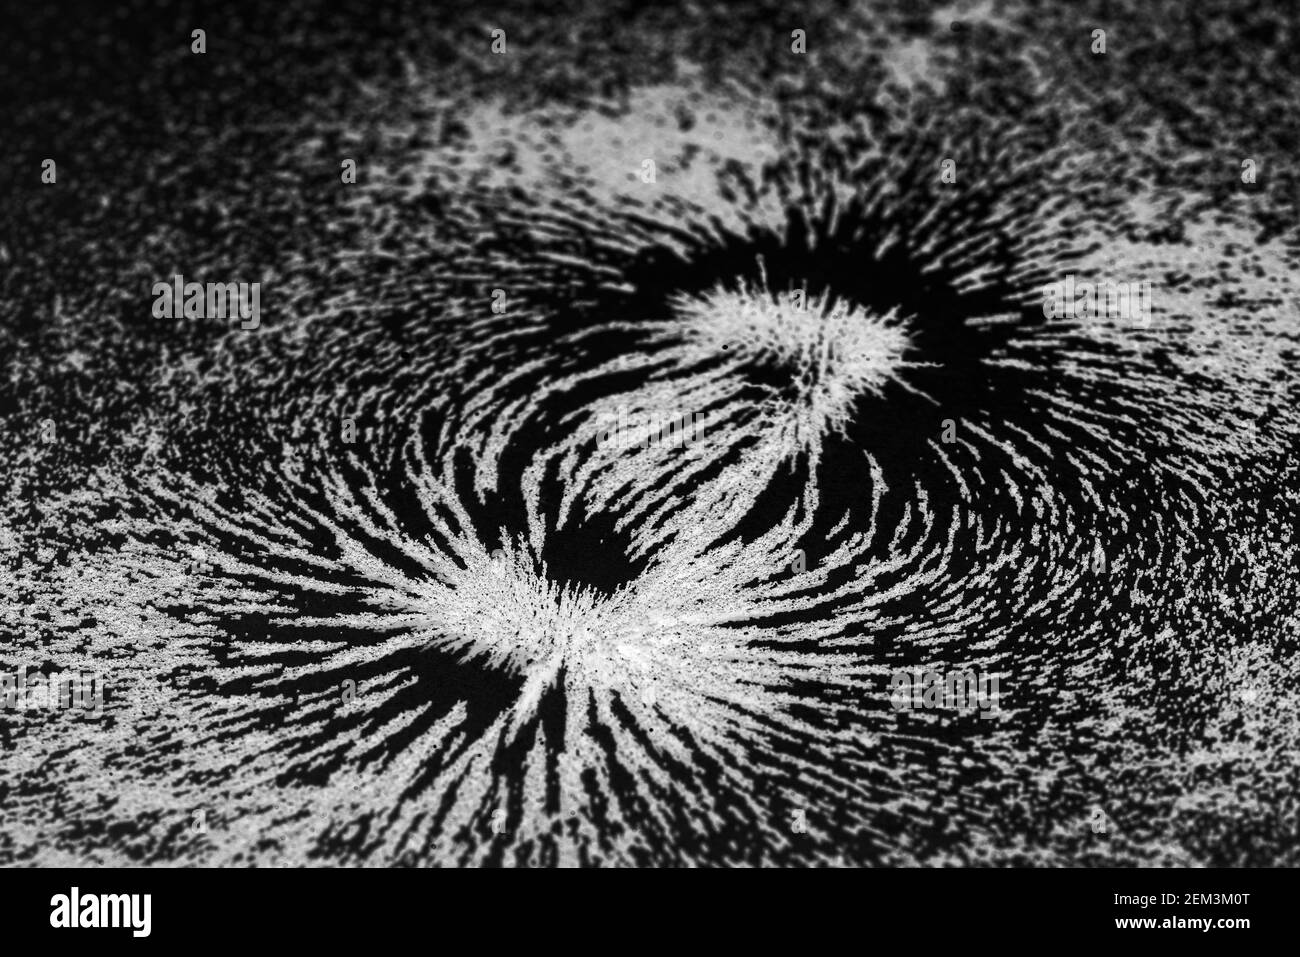 Magnetic field lines concept with bar magnet attraction and repulsion iron particles along lines of force Stock Photo